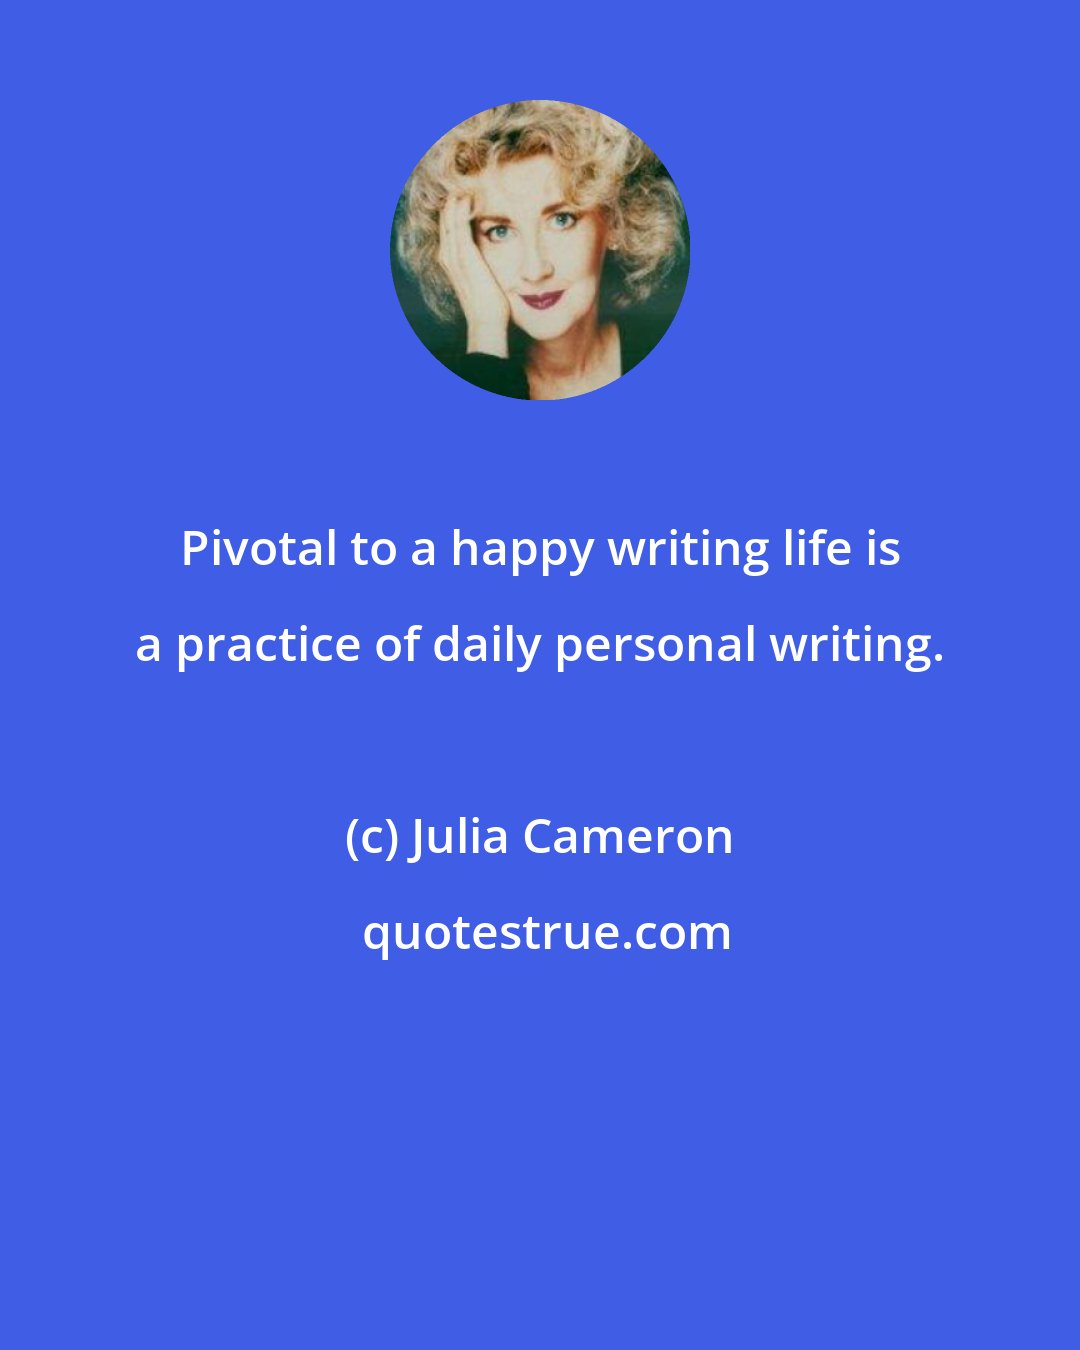 Julia Cameron: Pivotal to a happy writing life is a practice of daily personal writing.